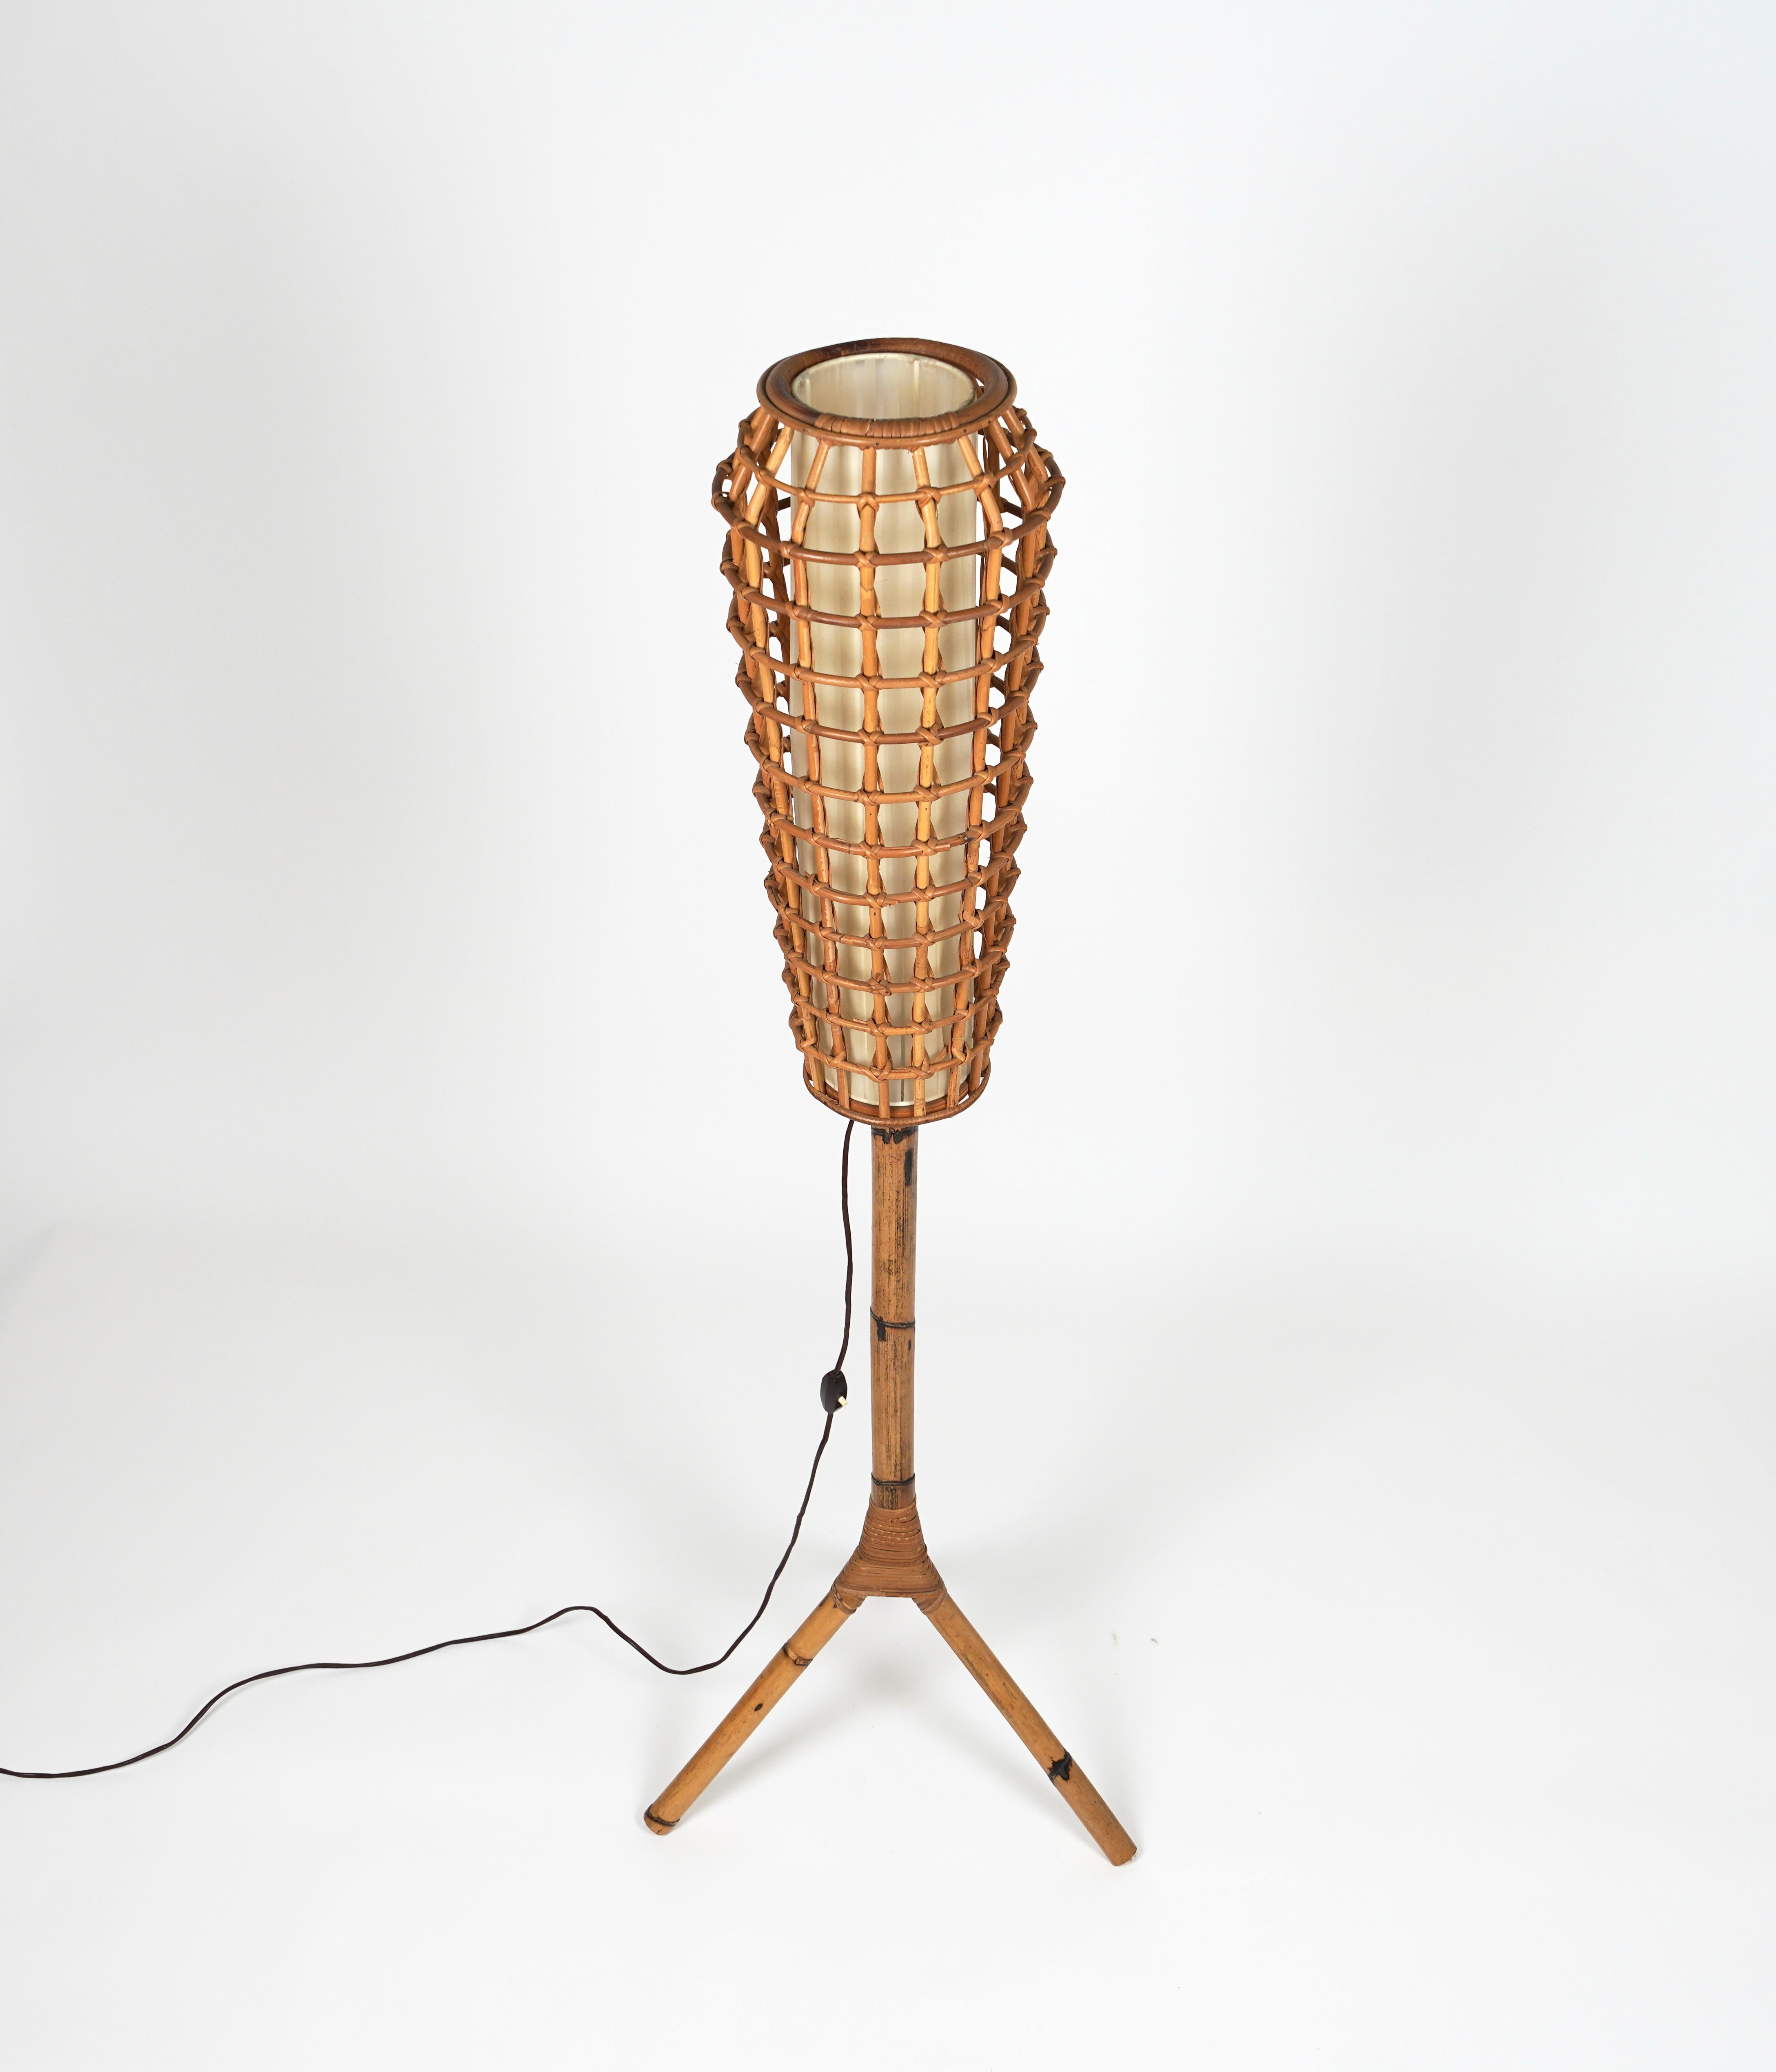 Mid-20th Century Midcentury Rattan and Bamboo Floor Lamp Franco Albini Style, Italy, 1960s For Sale